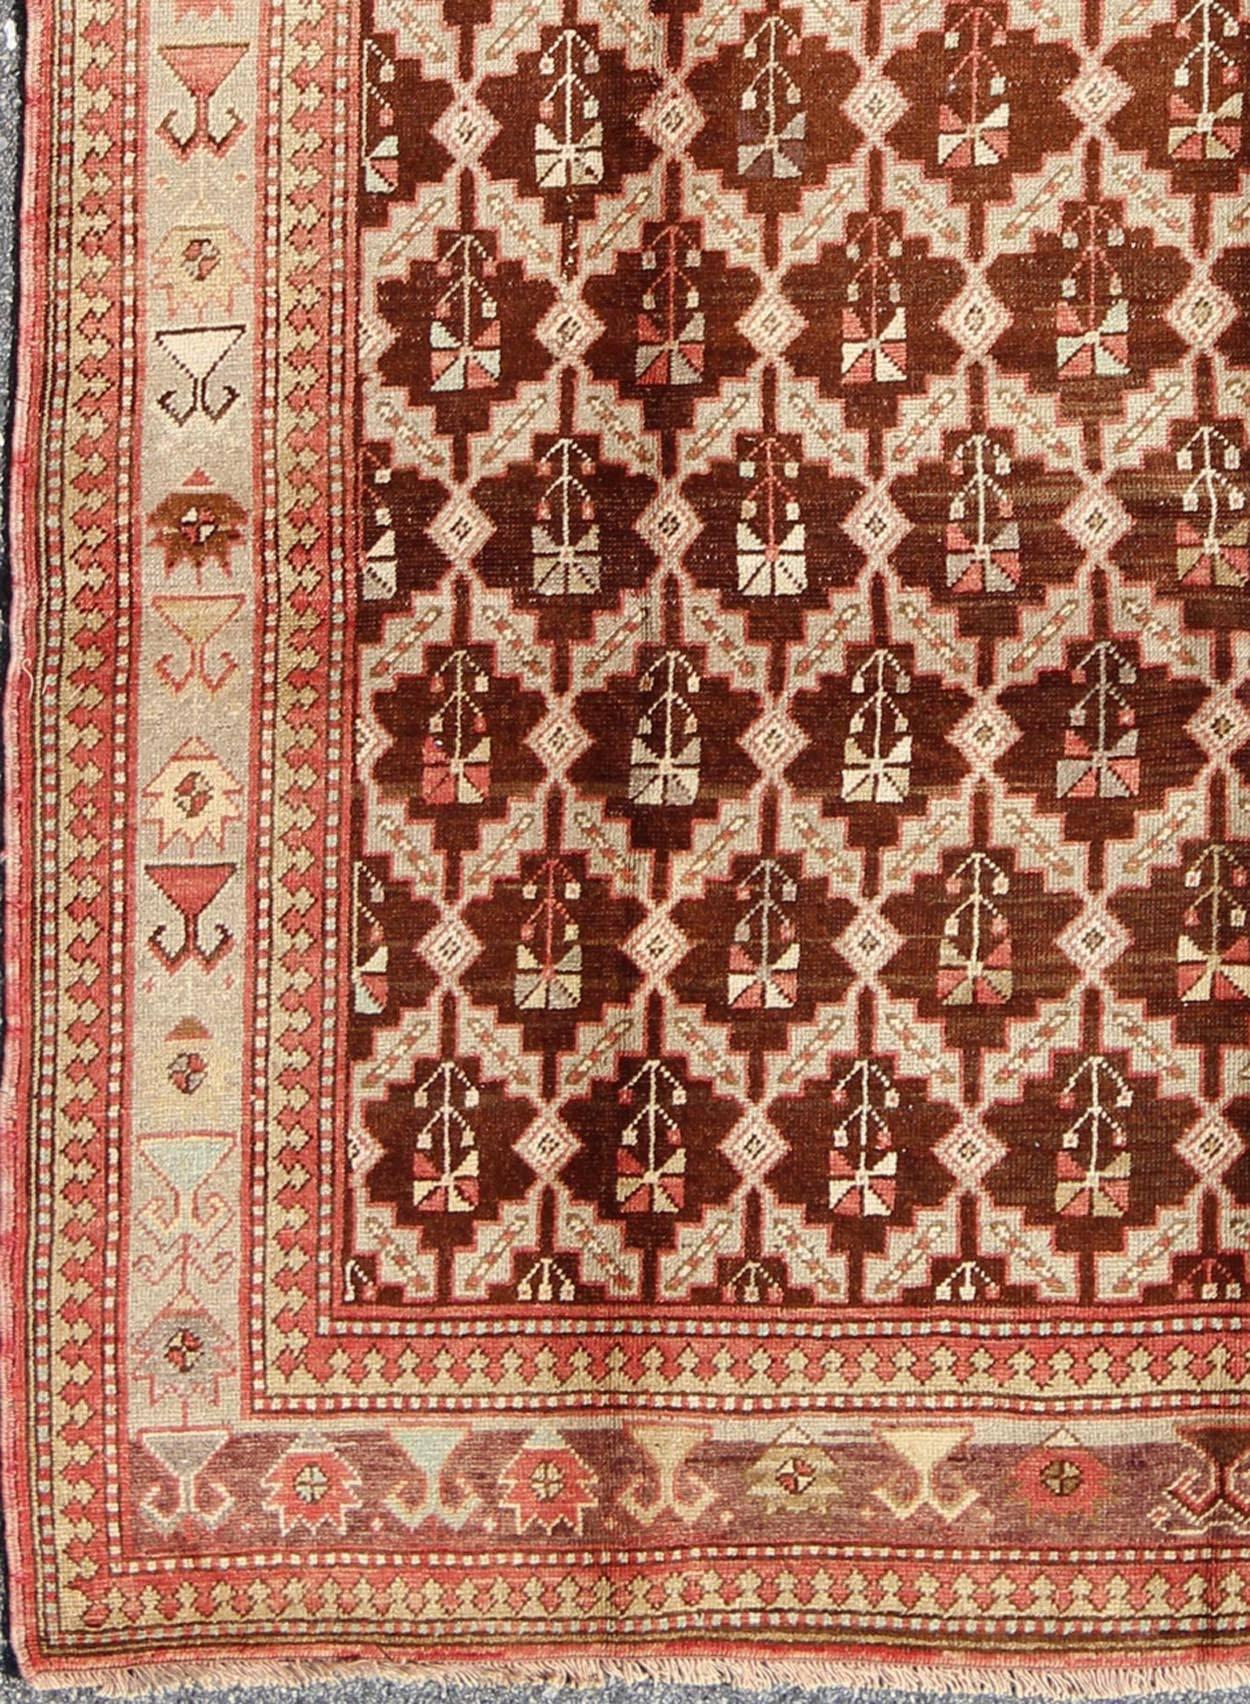 This wonderful Turkish Oushak has a chocolate brown background and a repeating pattern. Coral and ivory with hints of green make this a unique piece of art. The border motifs consist of Butter, pale blue, coral and very pale green.

Antique